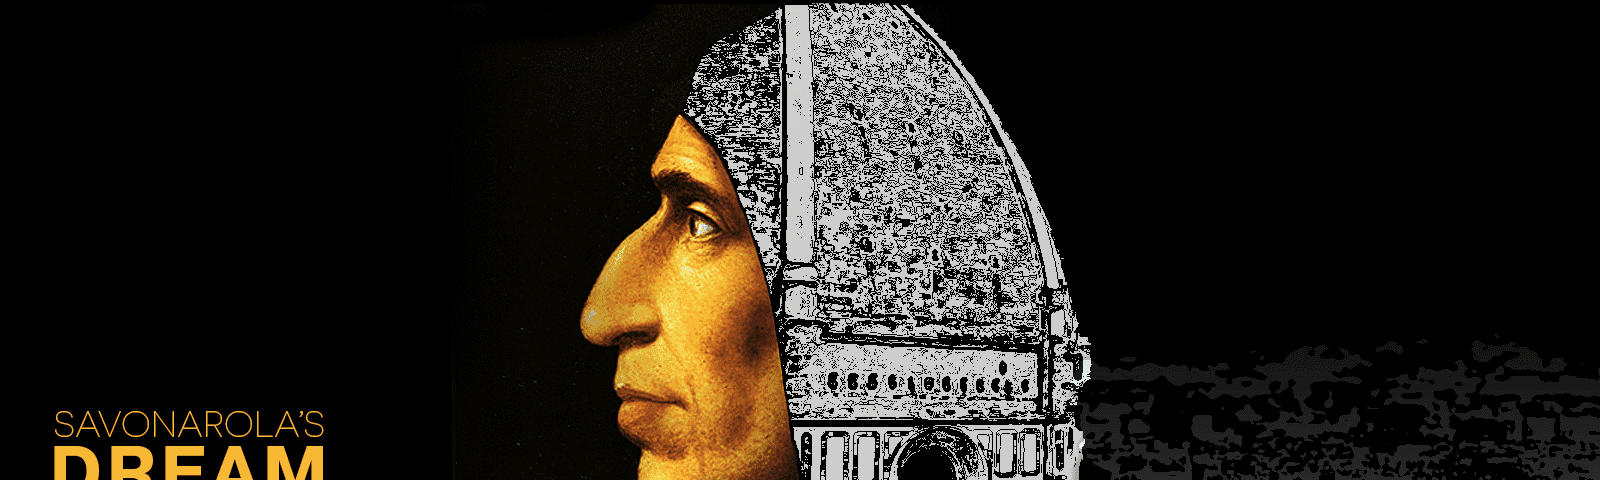 Savonarola remains one of the most puzzling and underestimated figures of the Renaissance